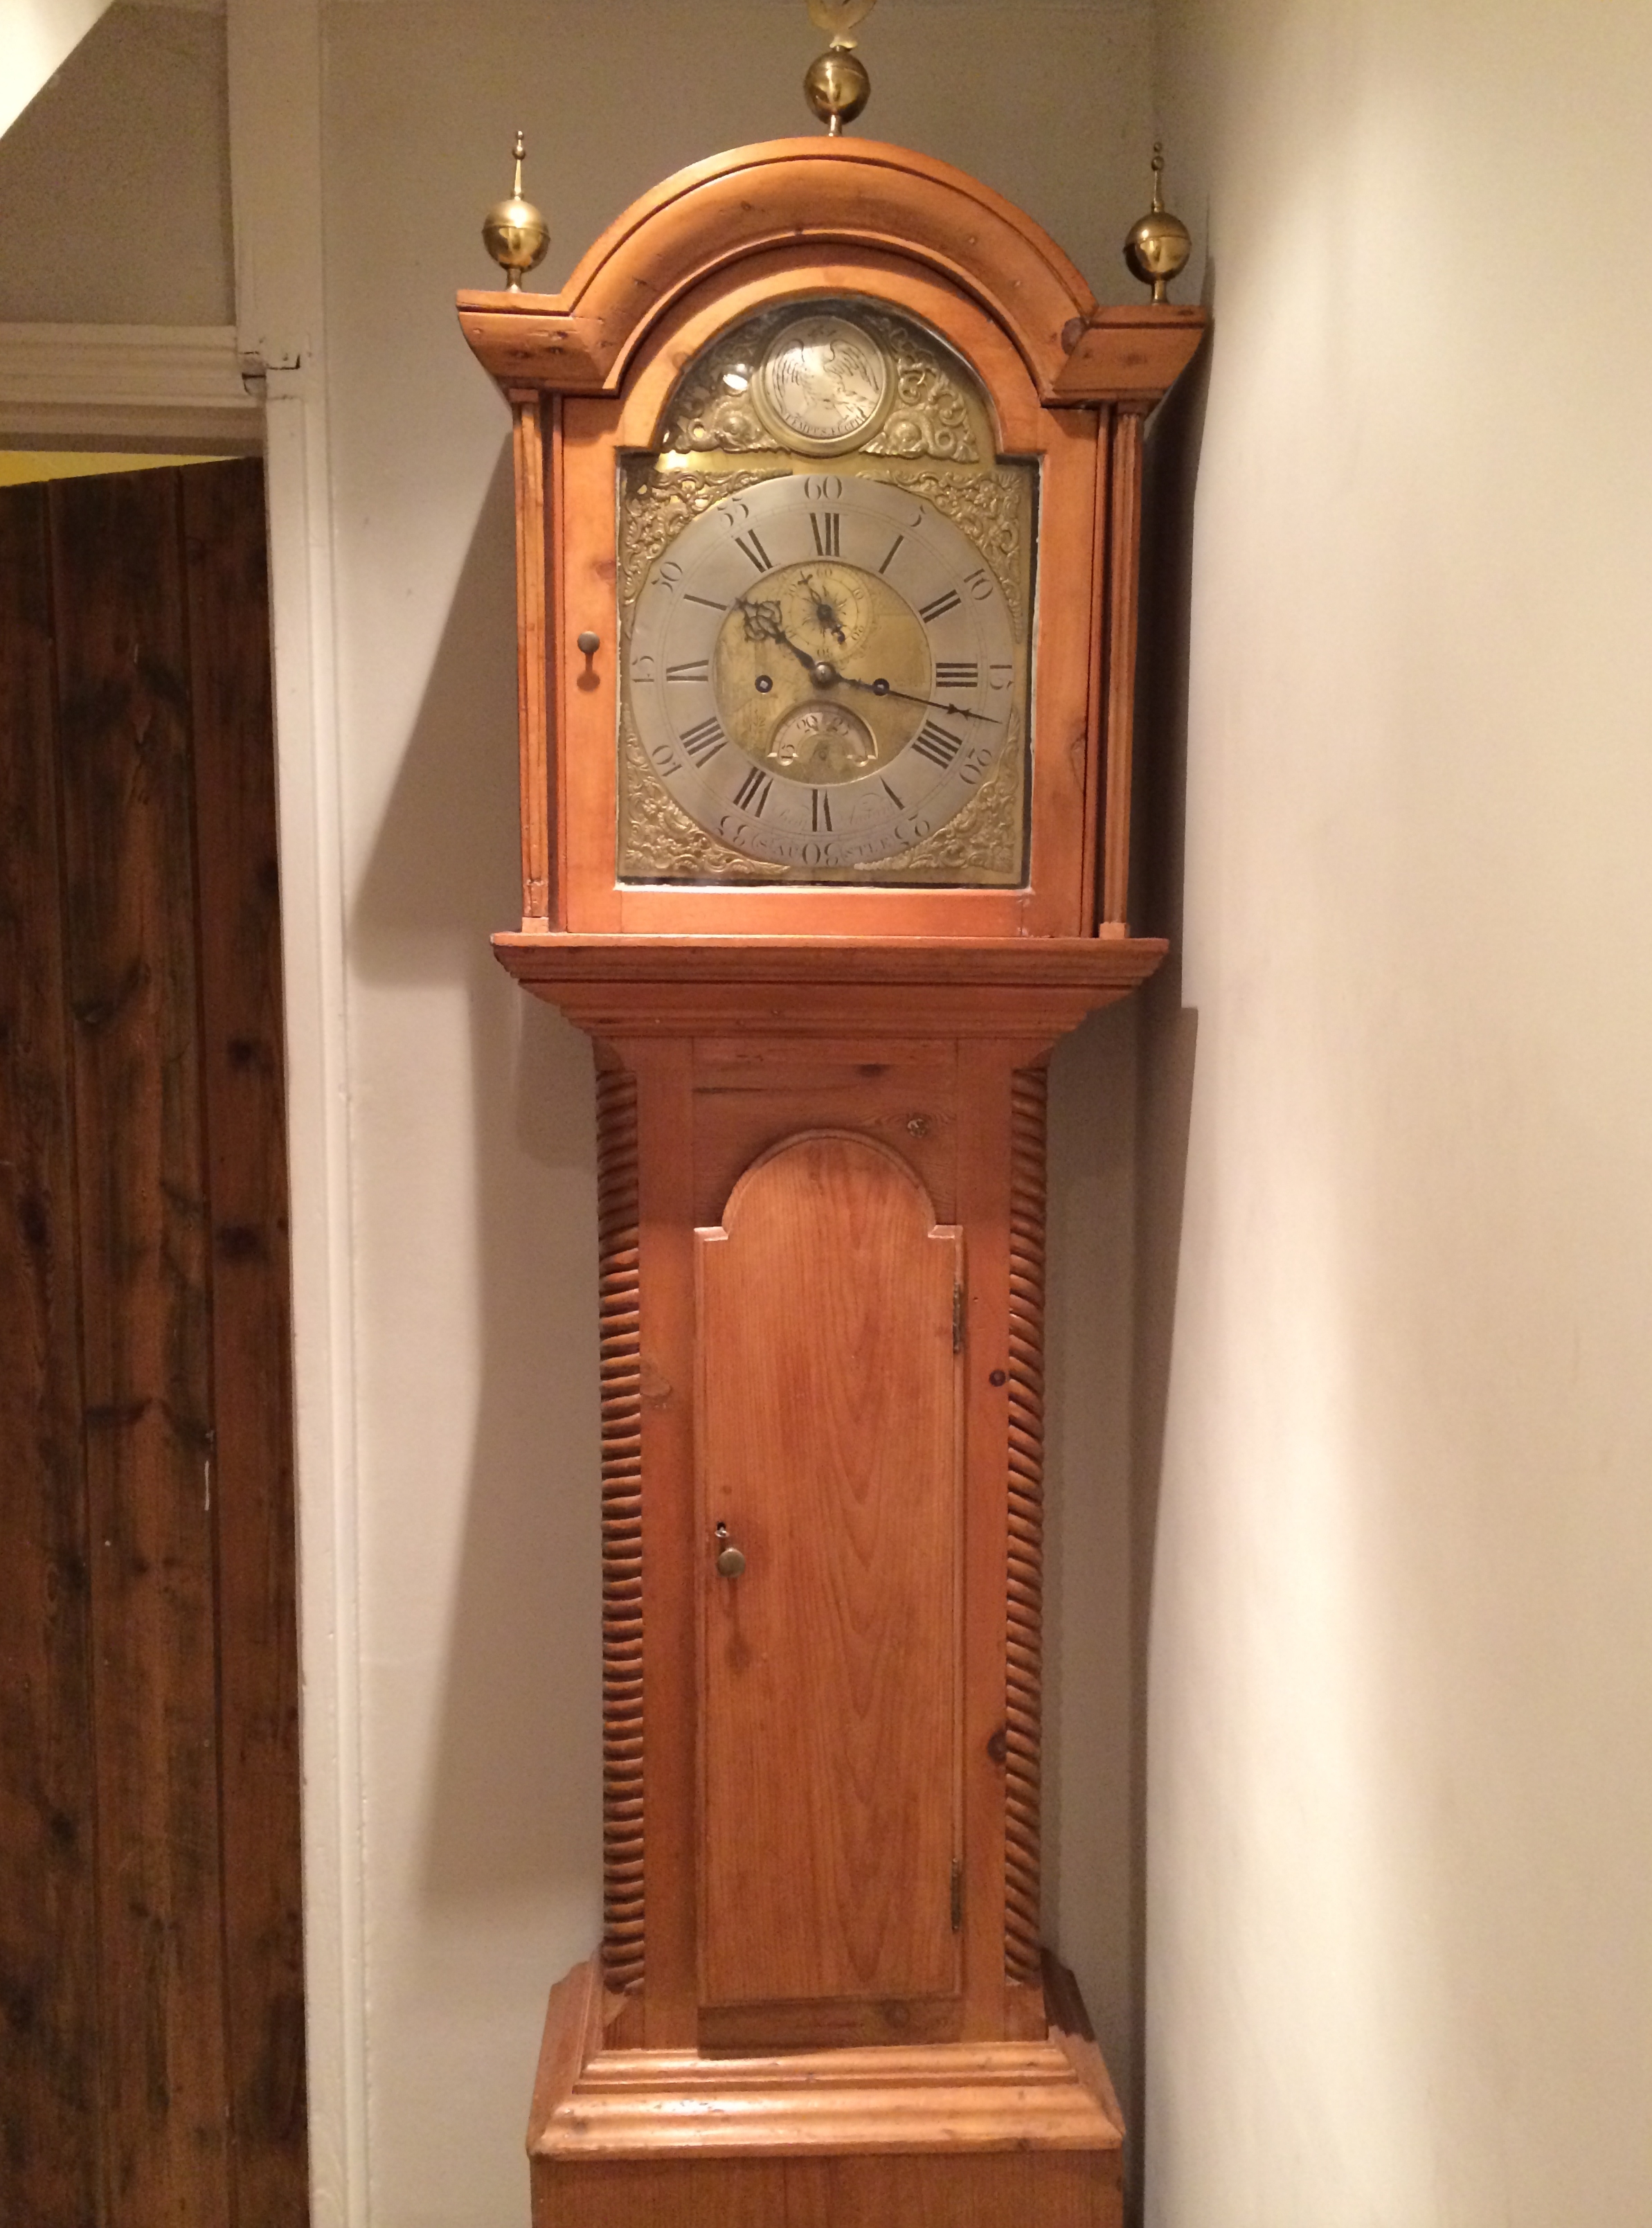 The clock in its new home